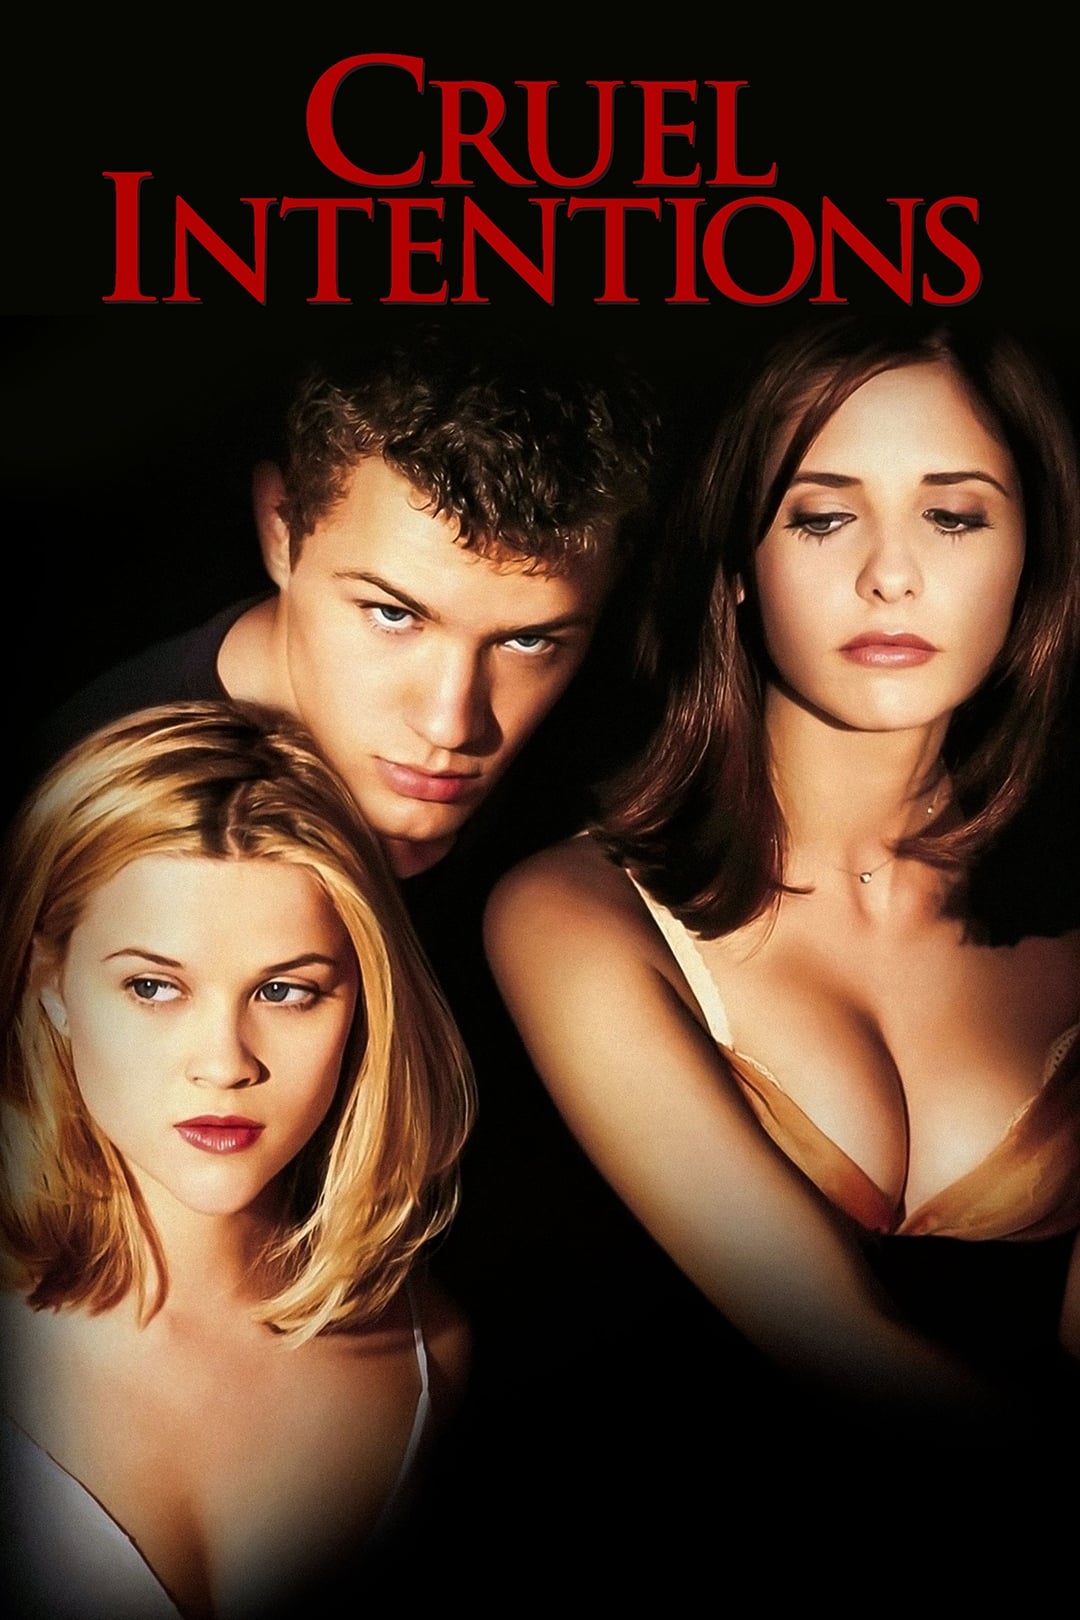 Movie and a Meal: Cruel Intentions